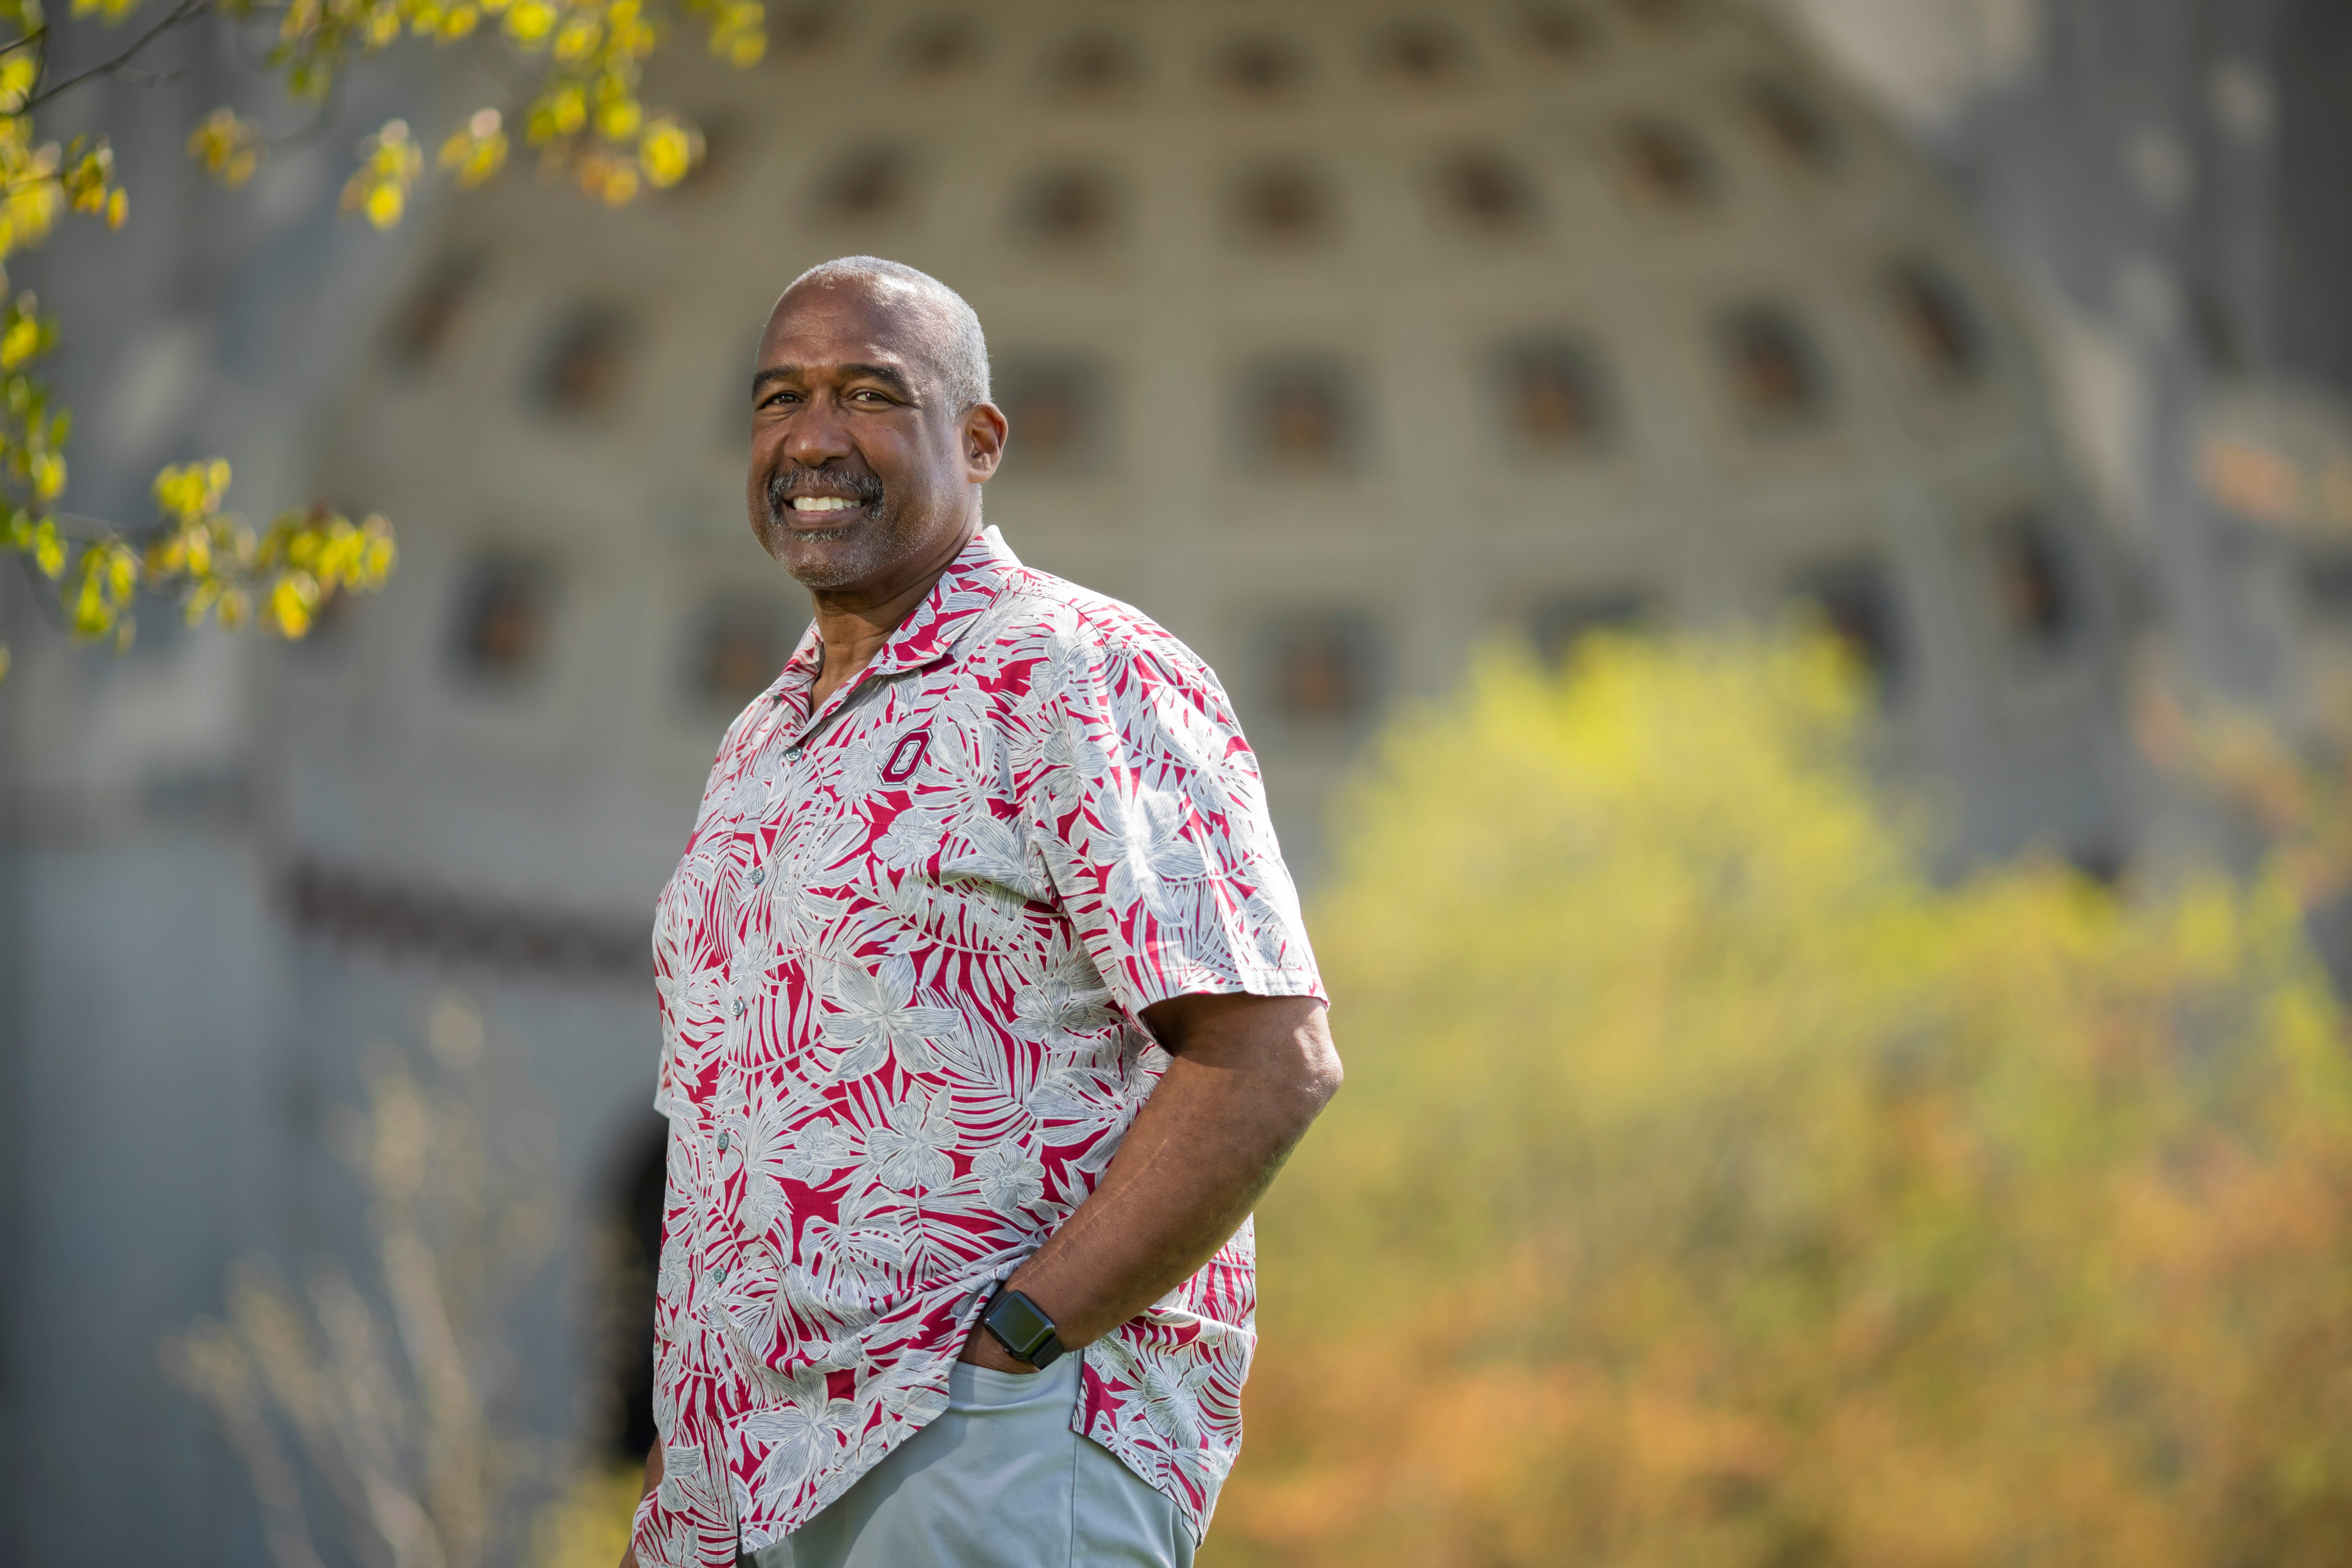 Ohio State's Gene Smith: 'A magnificent masterpiece painting of a career'